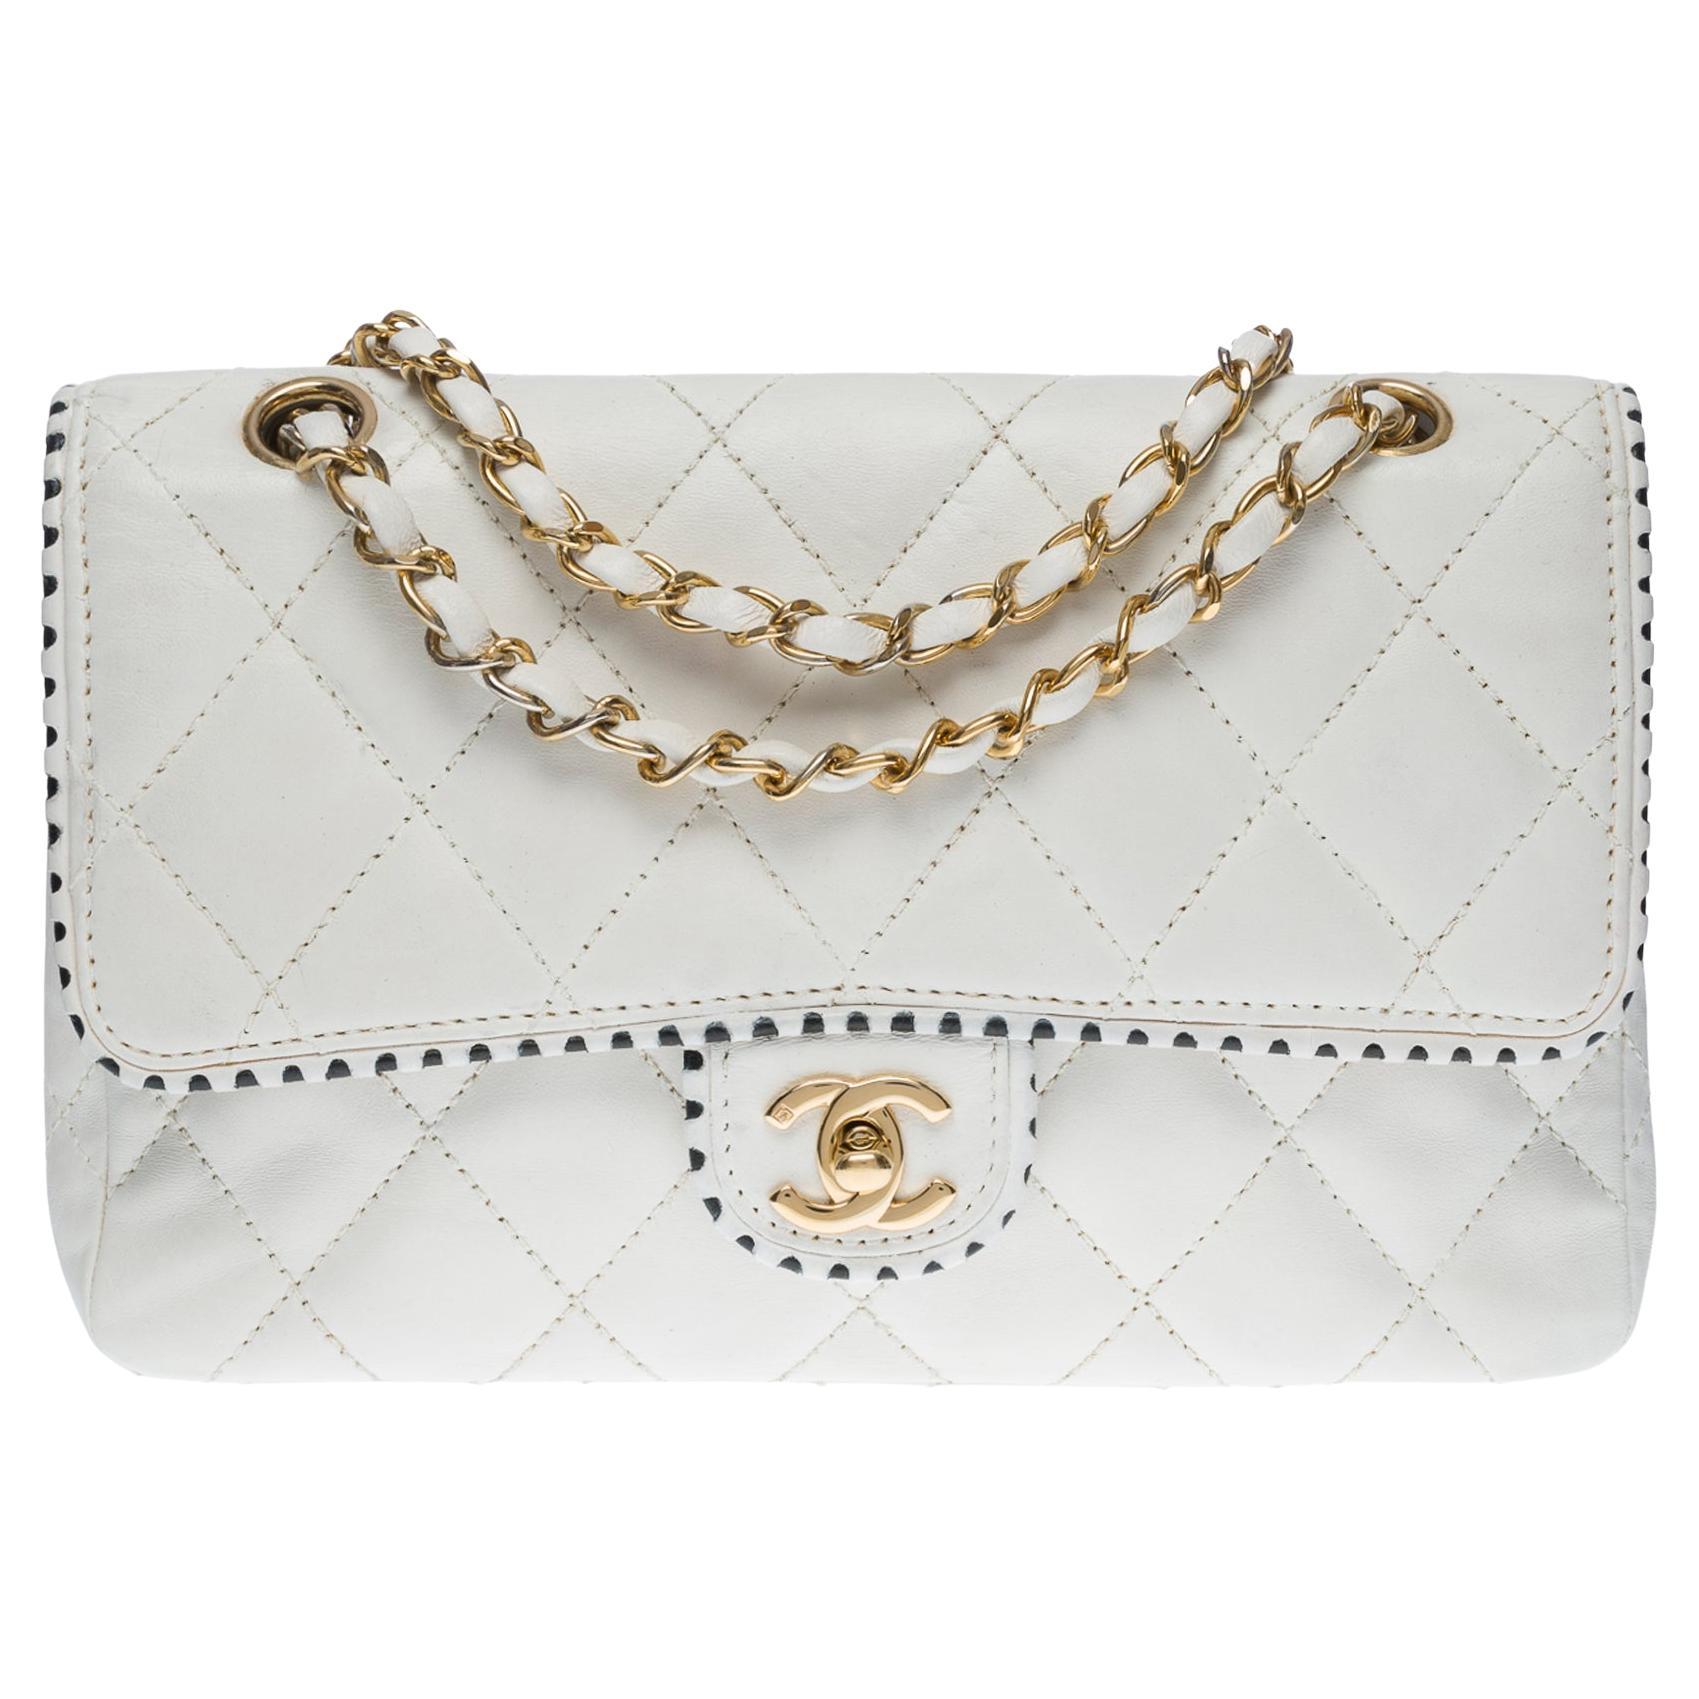 Chanel Timeless Medium single flap shoulder bag in white quilted leather, GHW For Sale